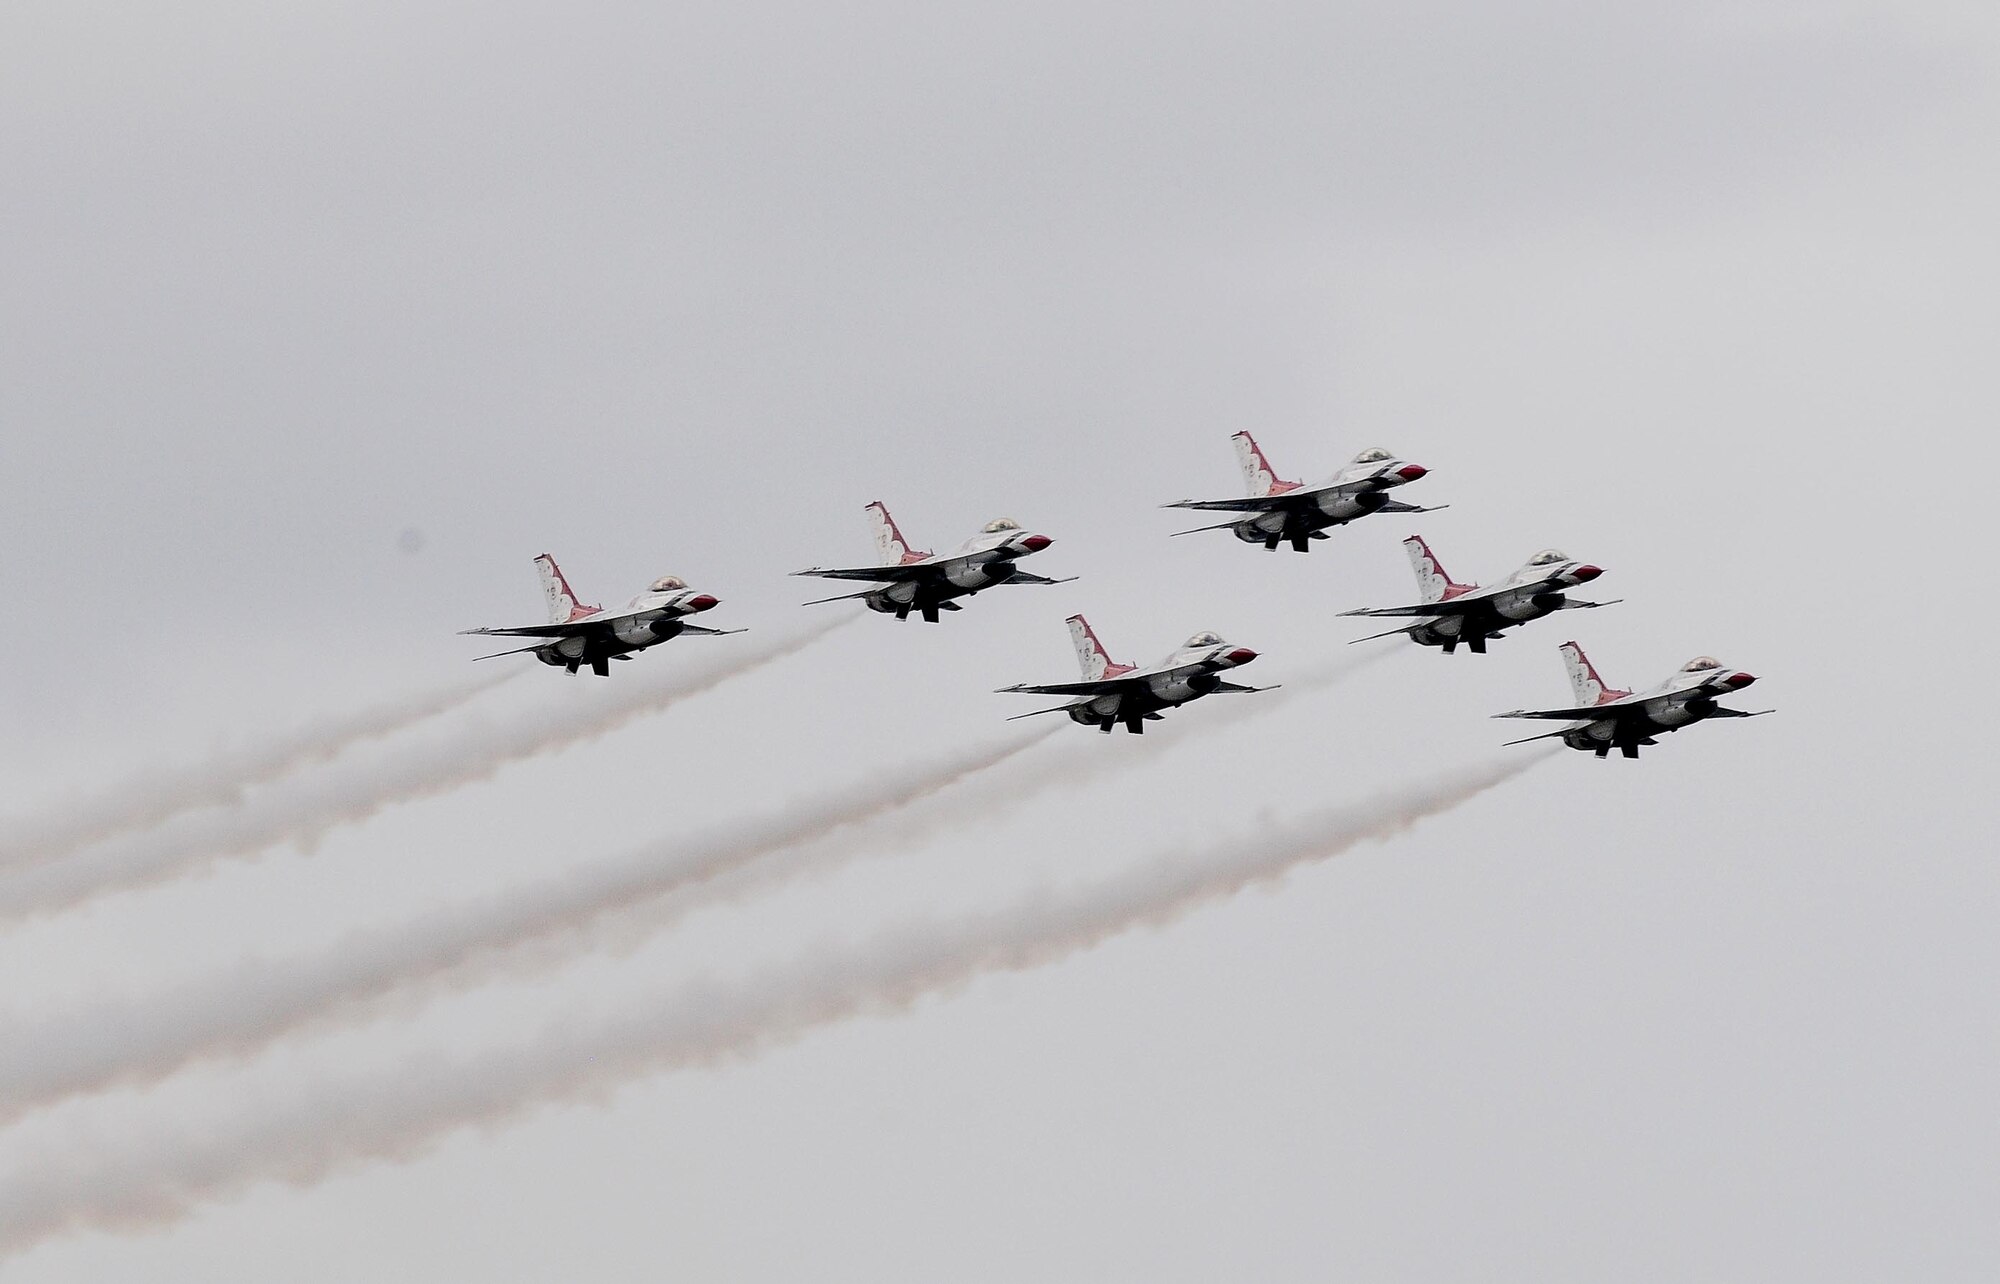 ANDERSEN AIR FORCE BASE, Guam - U.S. Air ForceThunderbird F-16s fly in trail formation here Oct. 6. The air show is a free even open to the public. Andersen's main gate will open at noon and close at 5 p.m. (U.S. Air Force photo by Senior Airman Nichelle Anderson)